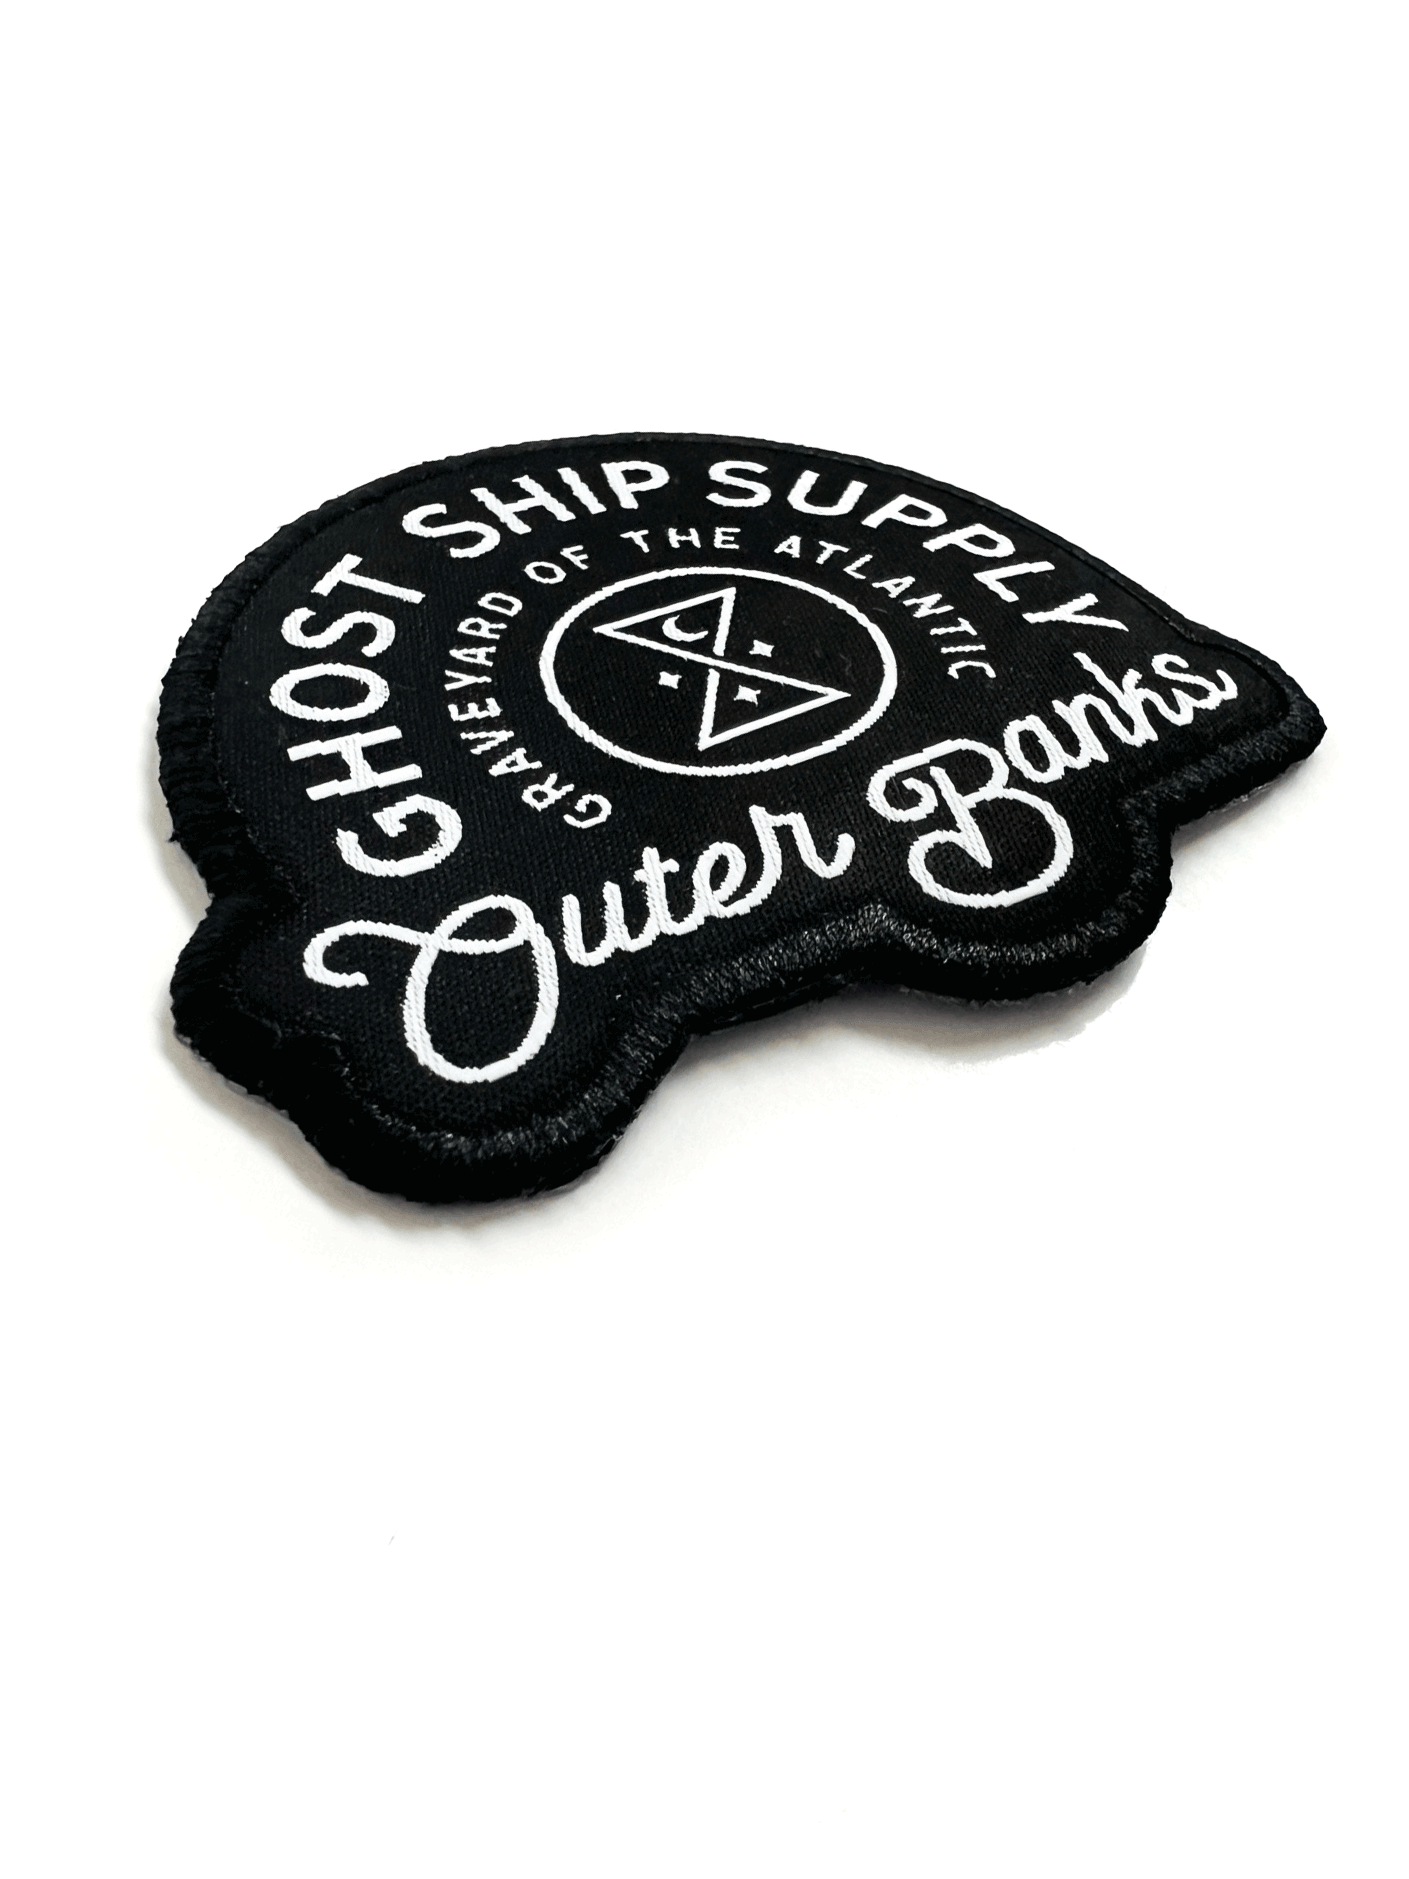 Insignia Black Woven Die Cut Patch - GHOSTSHIP.Supply